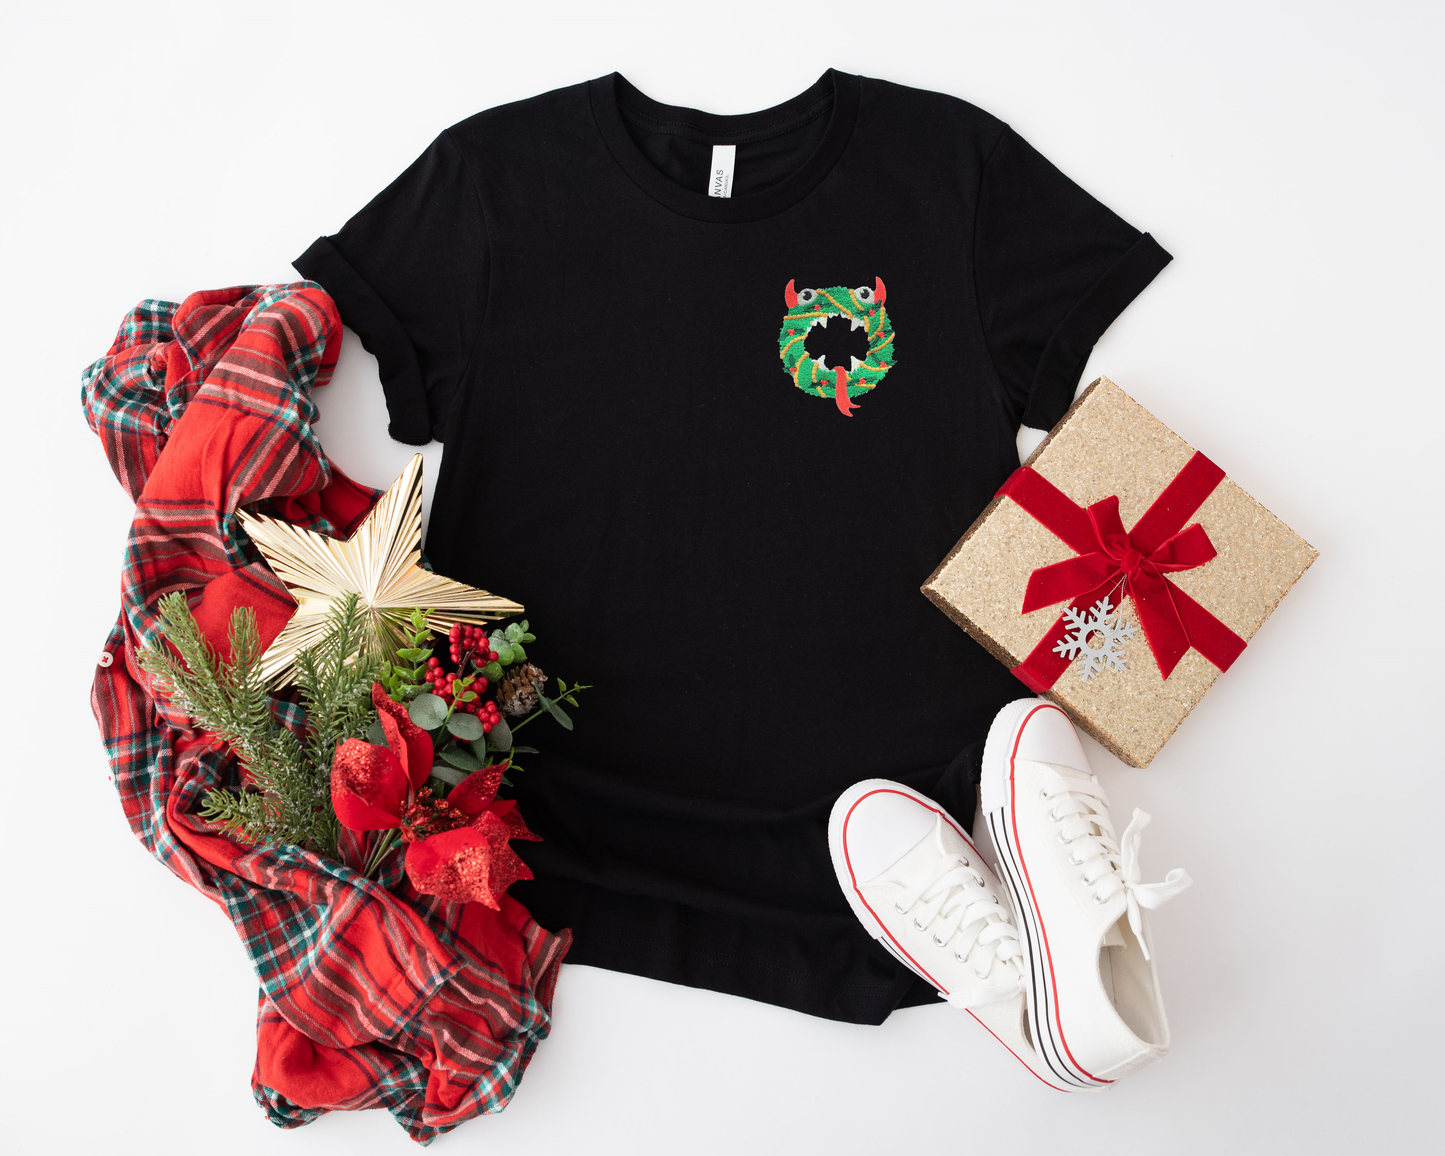 Monster Christmas Wreath Embroidered Adult Unisex Shirt